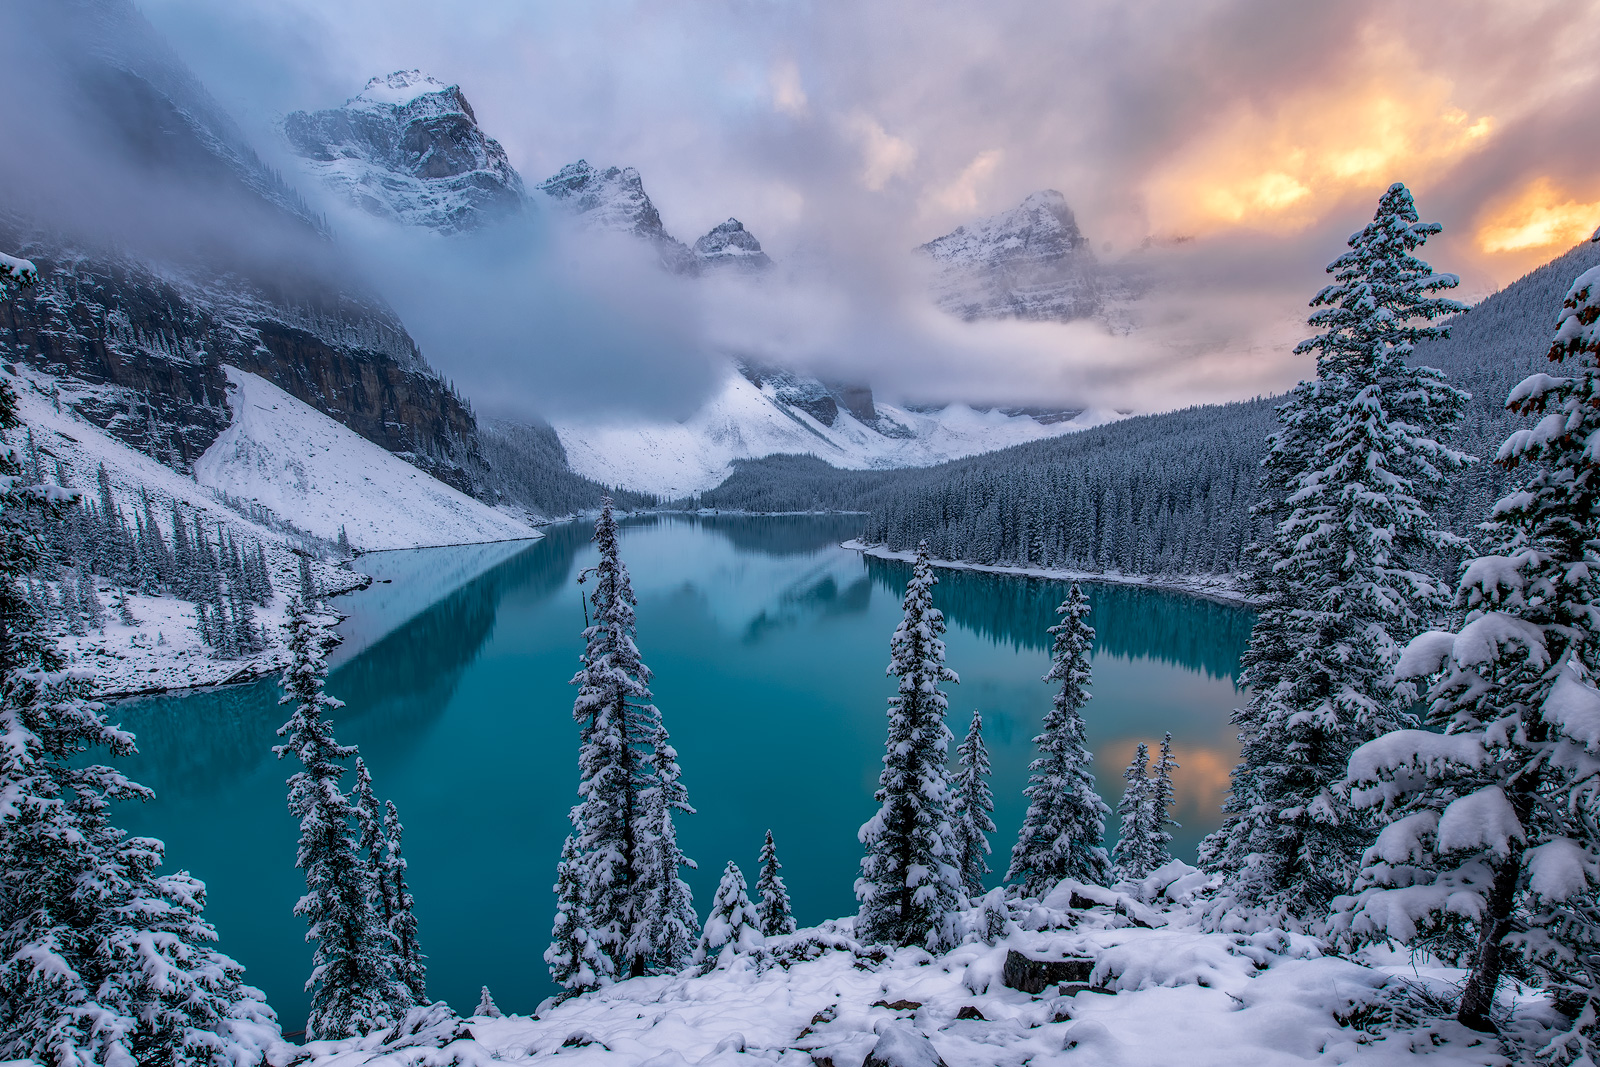 I've been all around the world, but there's one place that will always hold my heart dear: Moraine Lake. Its beauty is breathtaking...